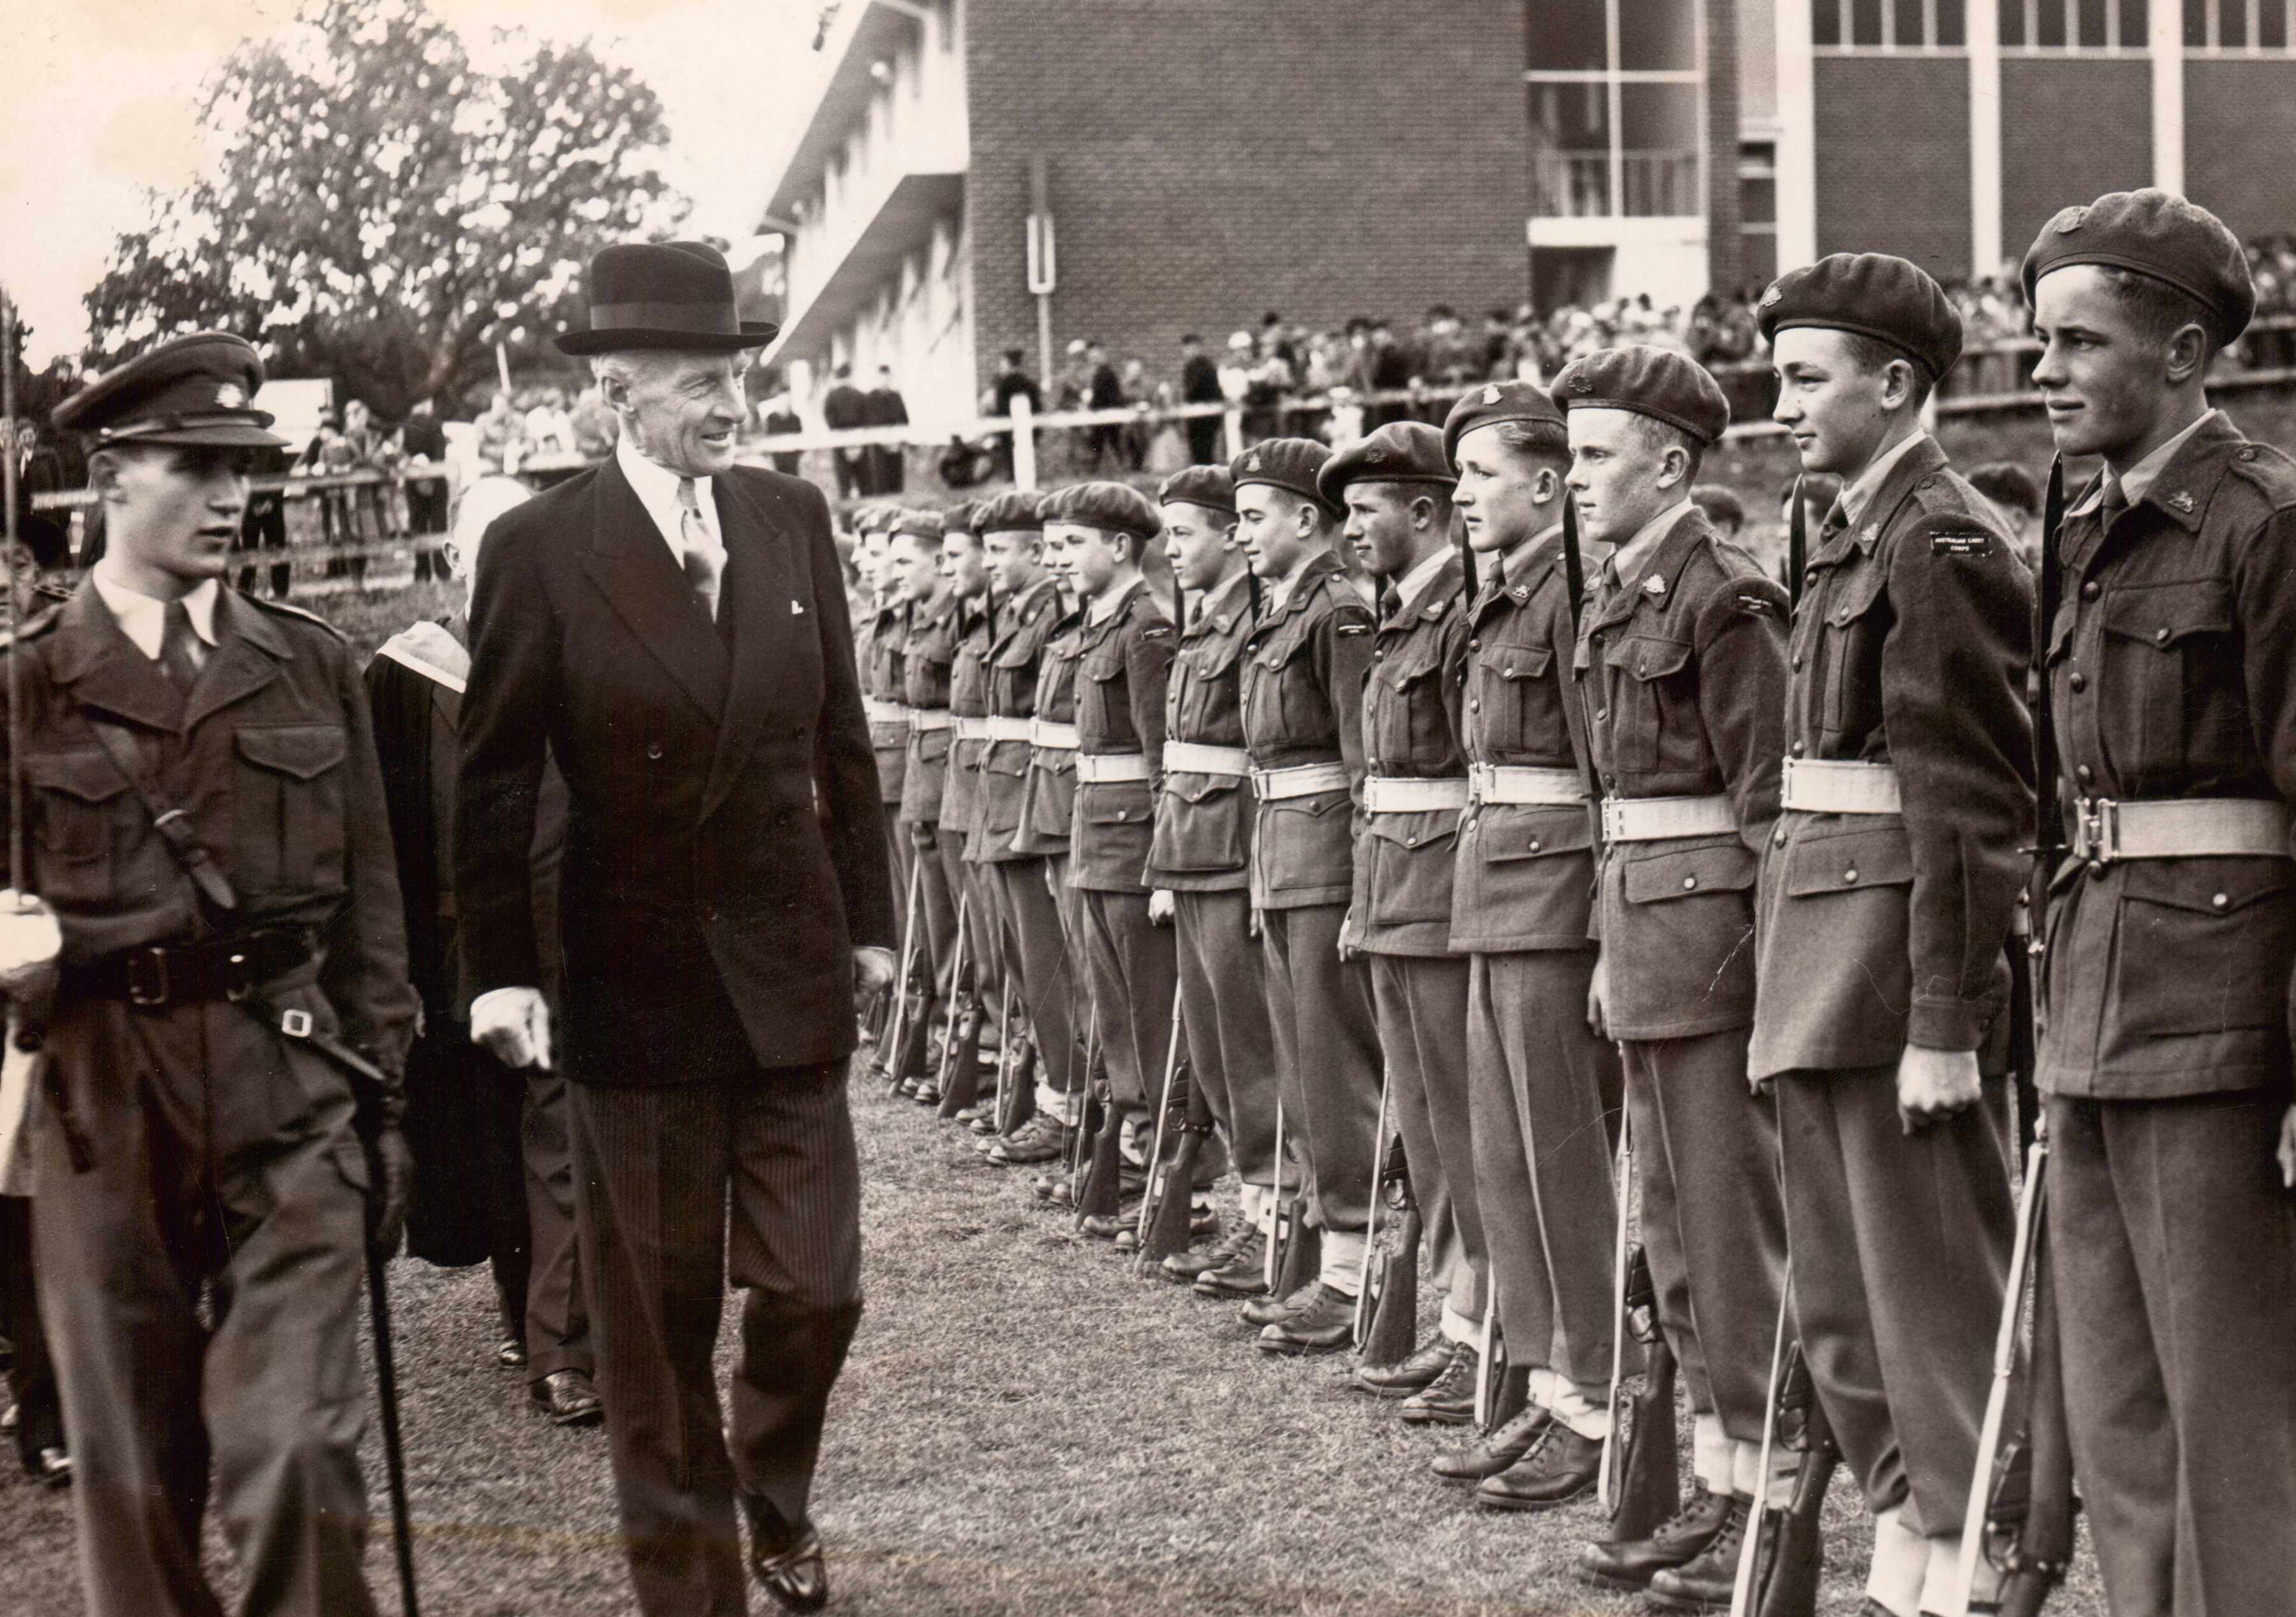 Governor Sir Ronald Cross inspecting Cadets at the opening of the Junior School, 1957.